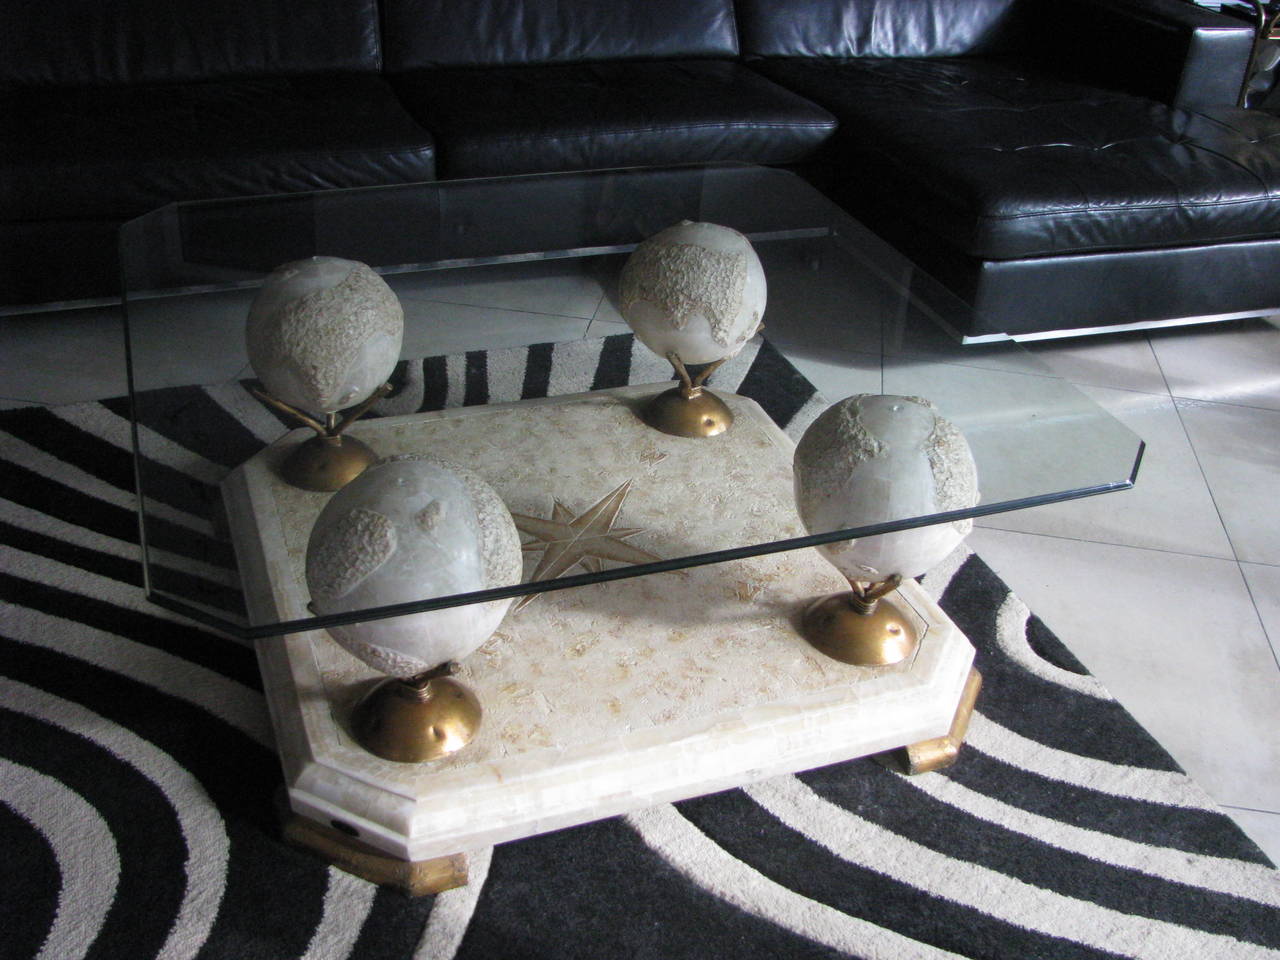 Very extraordinary coffee table from Atelier Fournier, Paris. The glass tops lies on four terrestrial globes which stack on gold colored metal bases. Globes and base are made of small marble mosaic stones. Signed on base.

Measures: 

Width 110